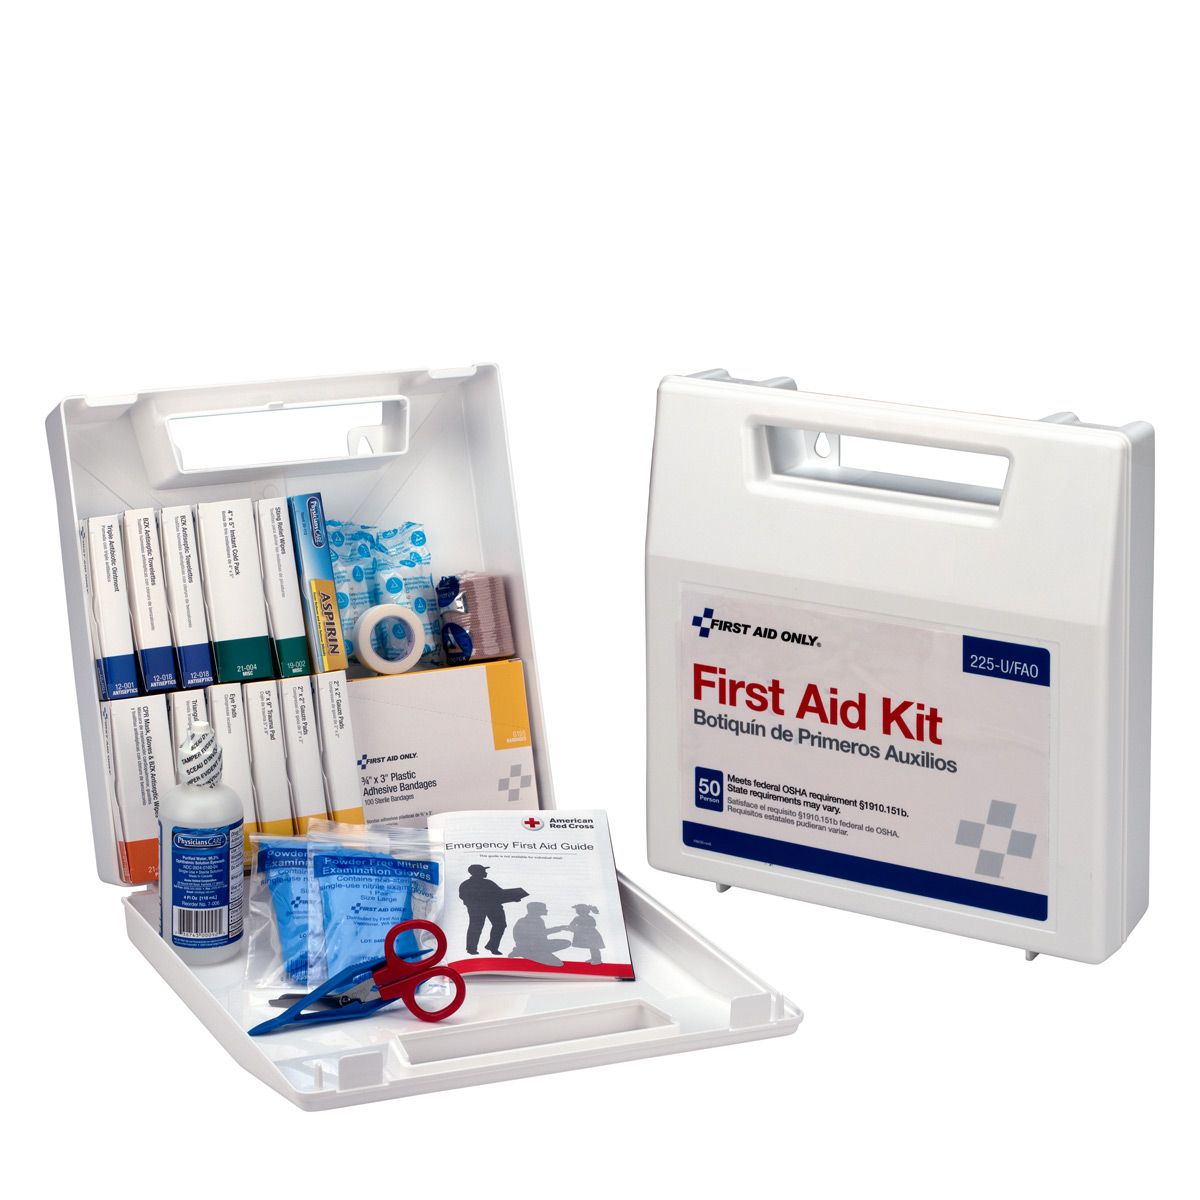 First Aid Only 50 Person, 24 Unit Kit 225-U/FAO